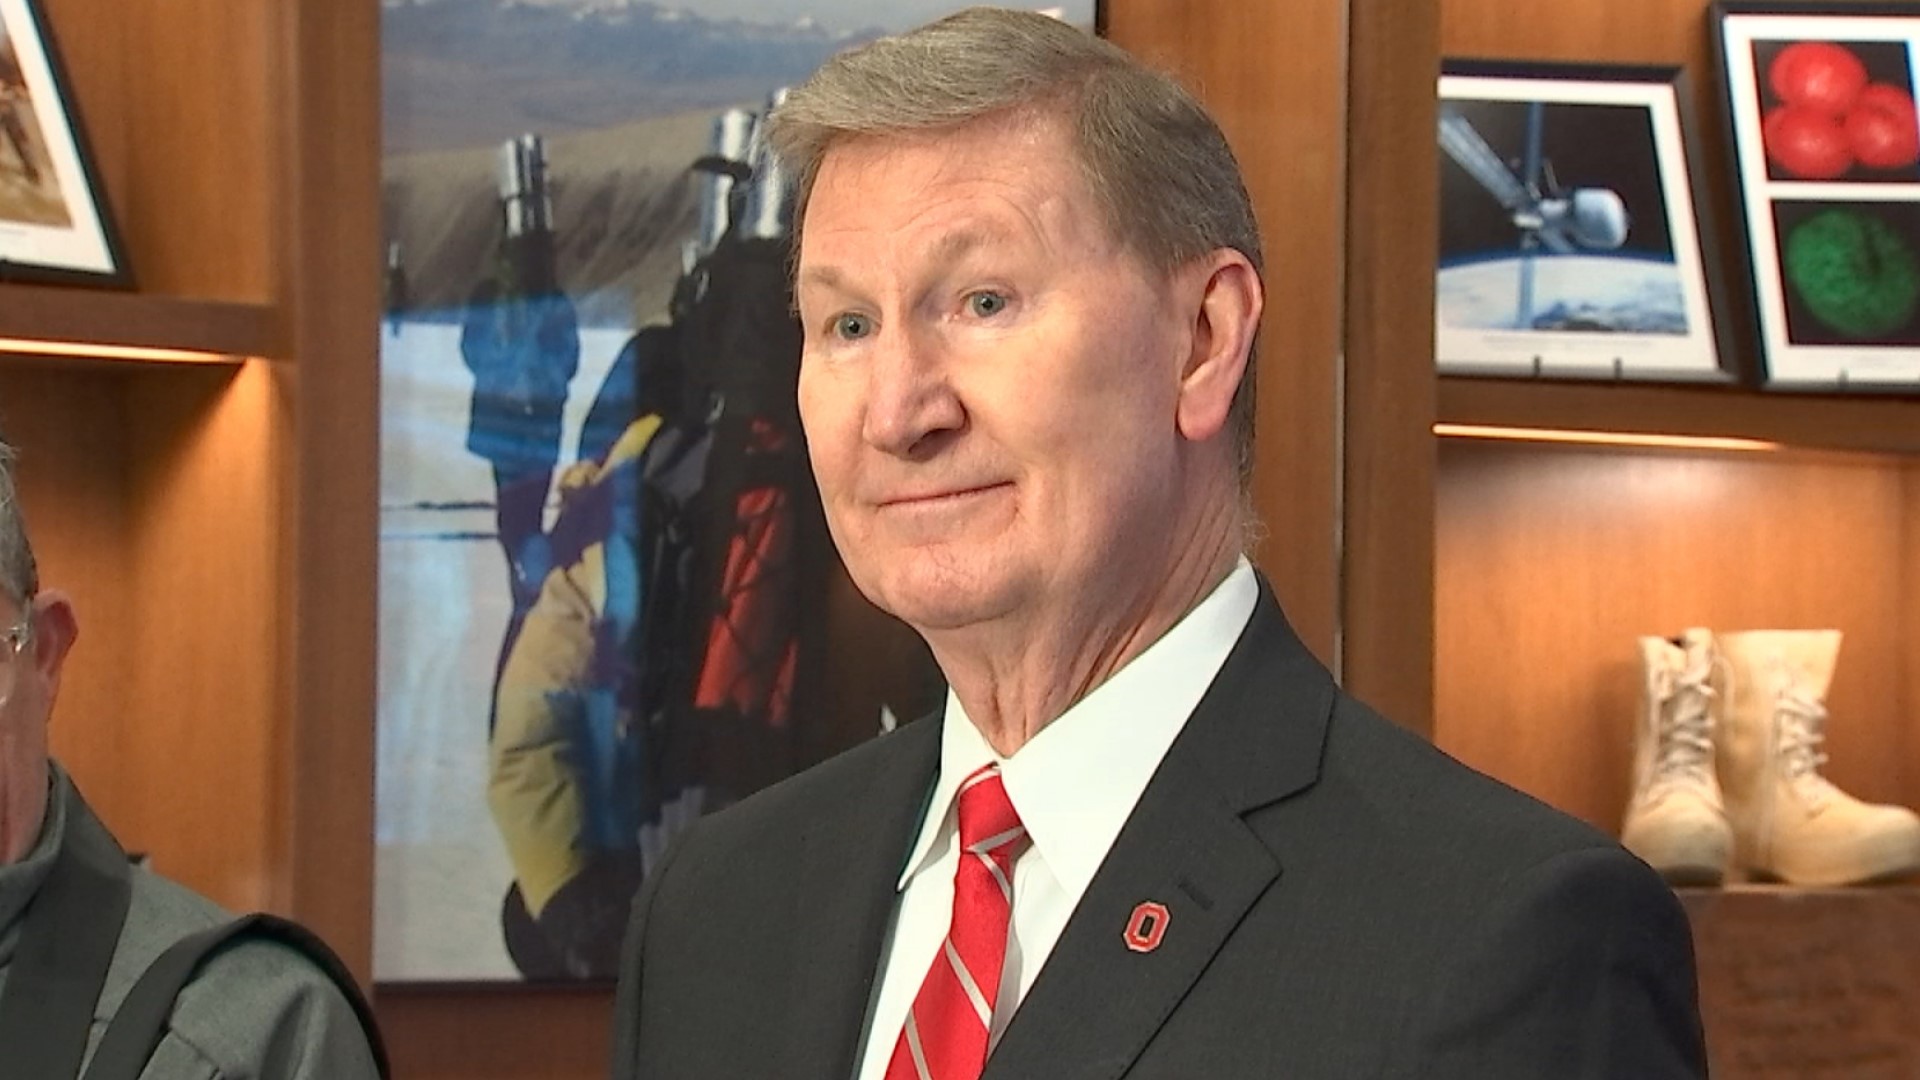 Ohio State new president Ted Carter to campus